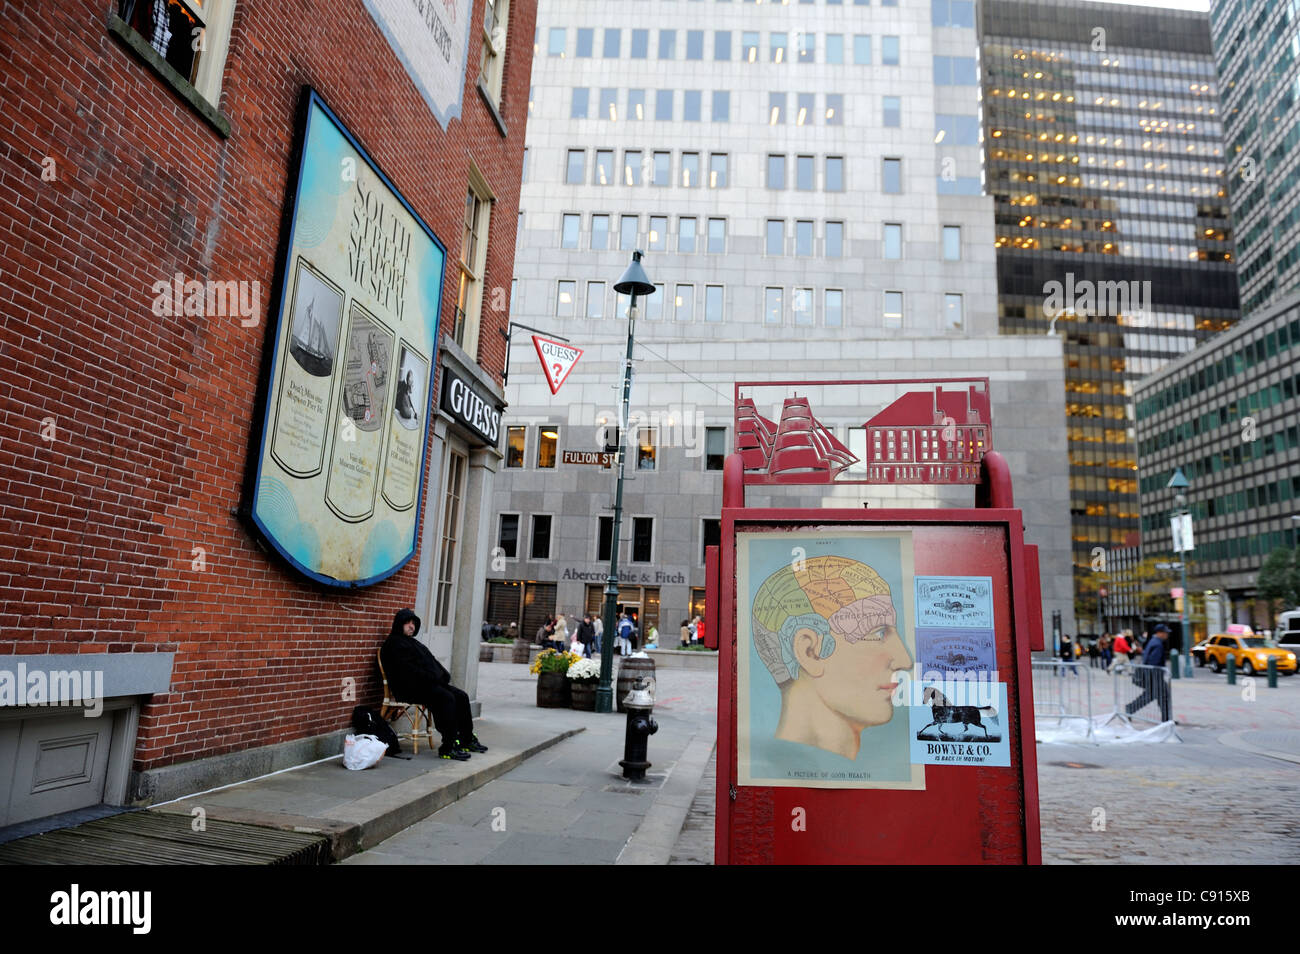 The logo of the South Street Seaport Museum is on a buoy board on Water Street in the Seaport Historic District. Stock Photo